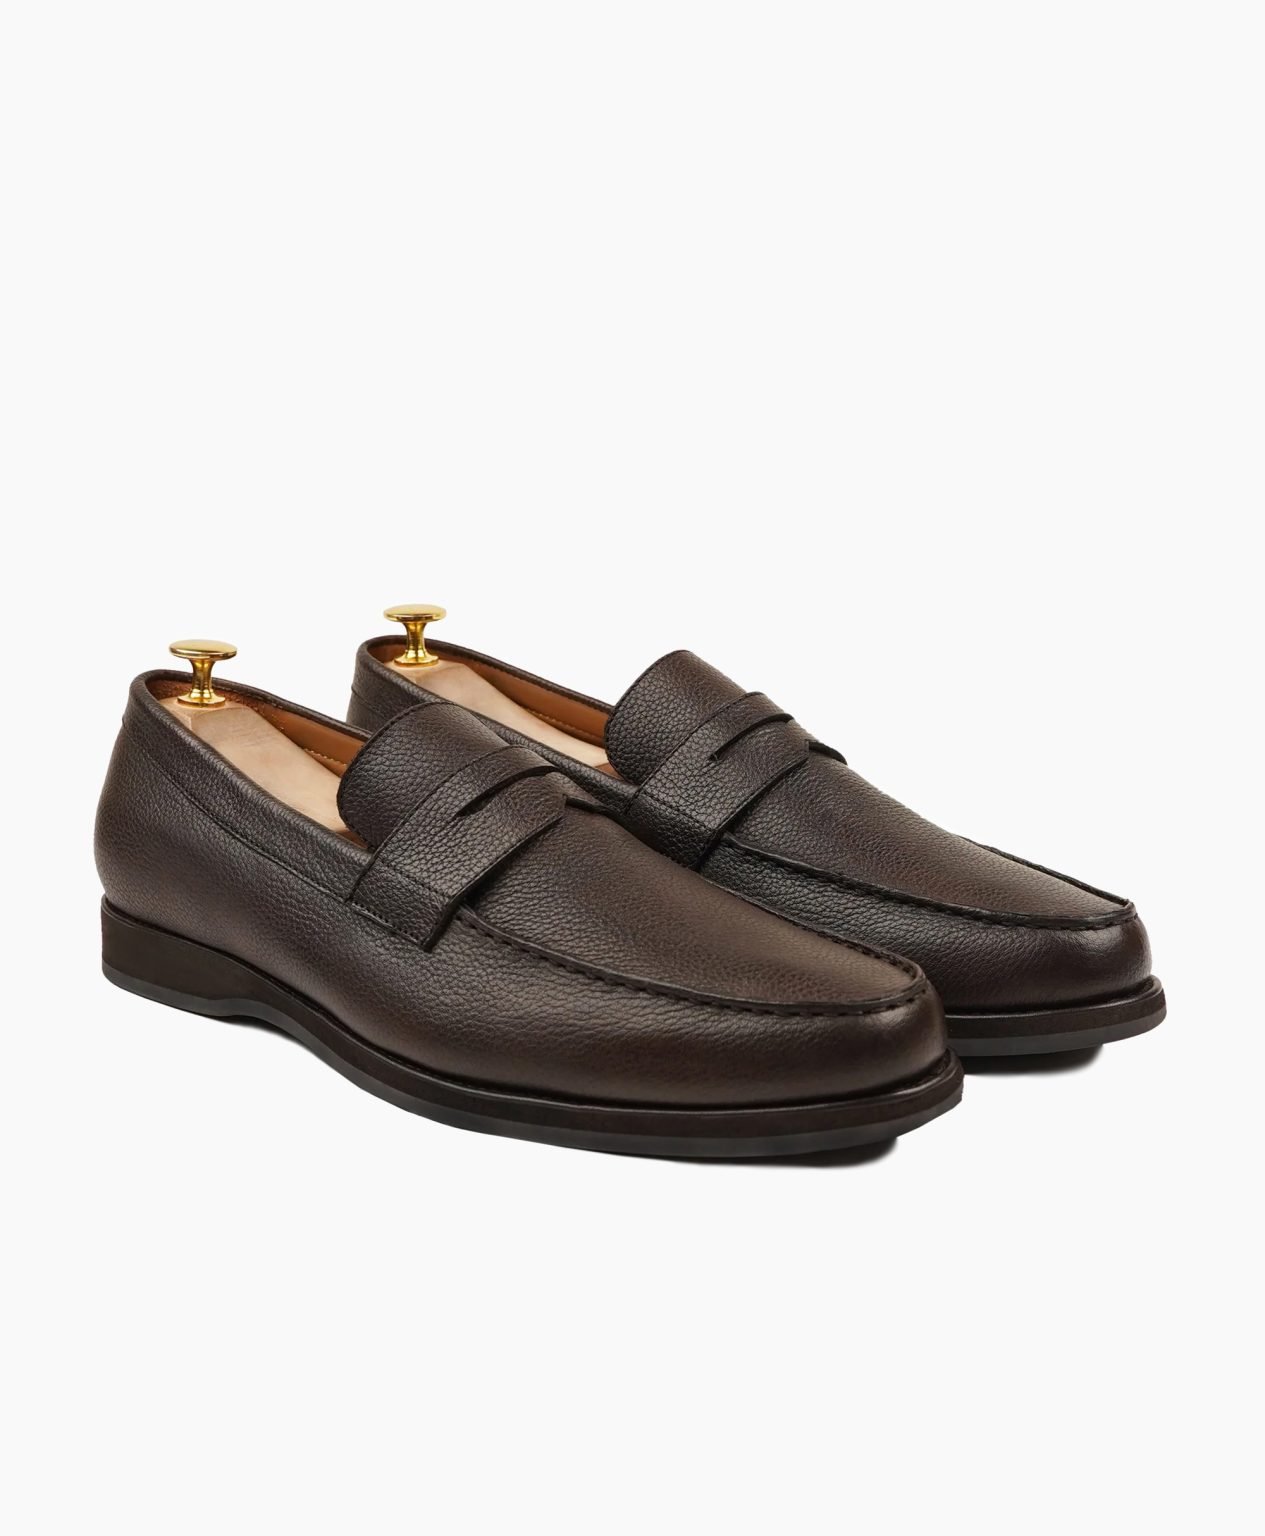 lynton-dark-brown-leather-loafers-image200